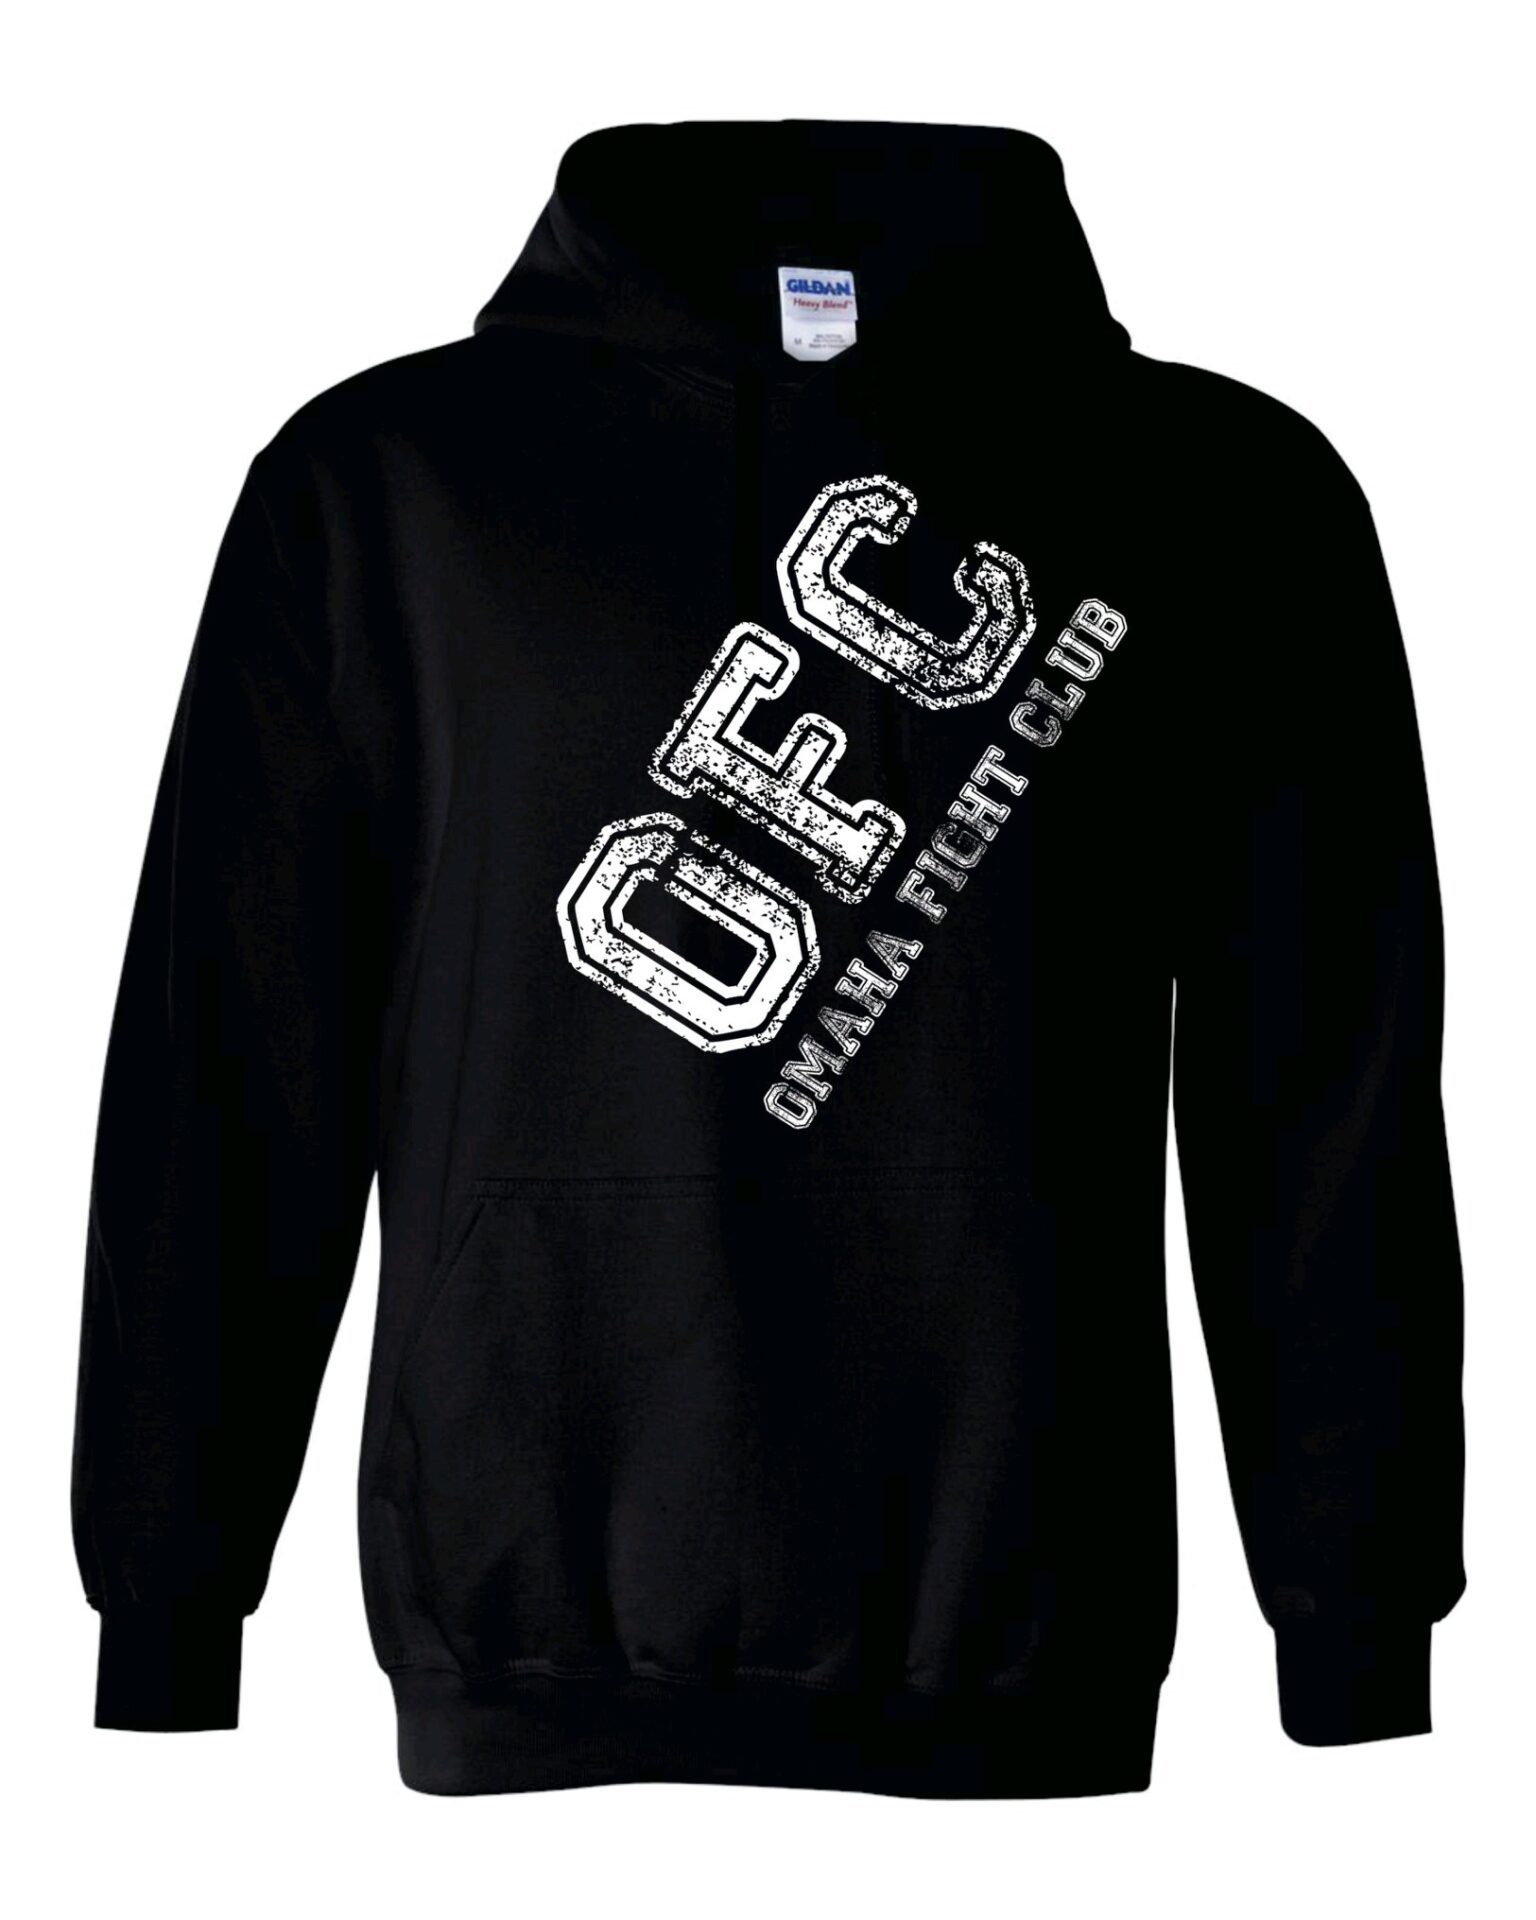 OFC Black Hoodie with white print